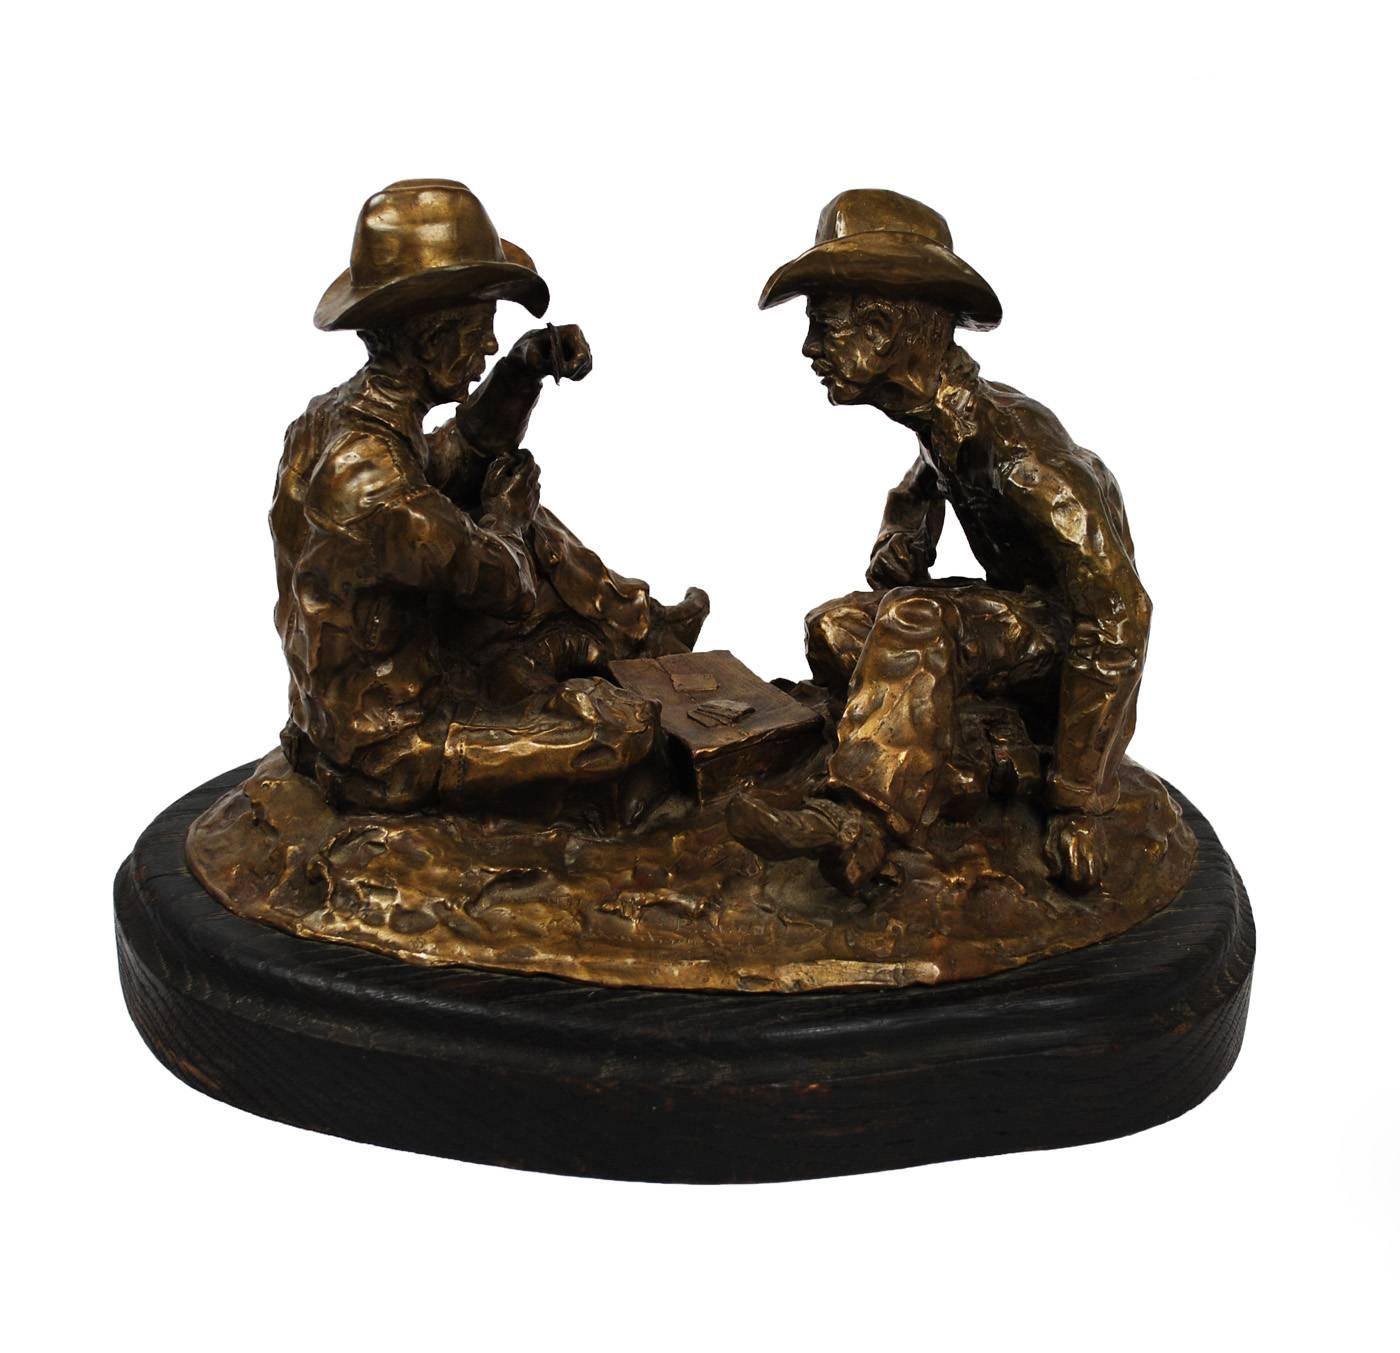 A western themed cast bronze sculpture by artist Jim Thomas. Two cowboys sit together playing a high-stakes hand in poker. Rustic execution matches the subject matter. The piece is marked in bronze 